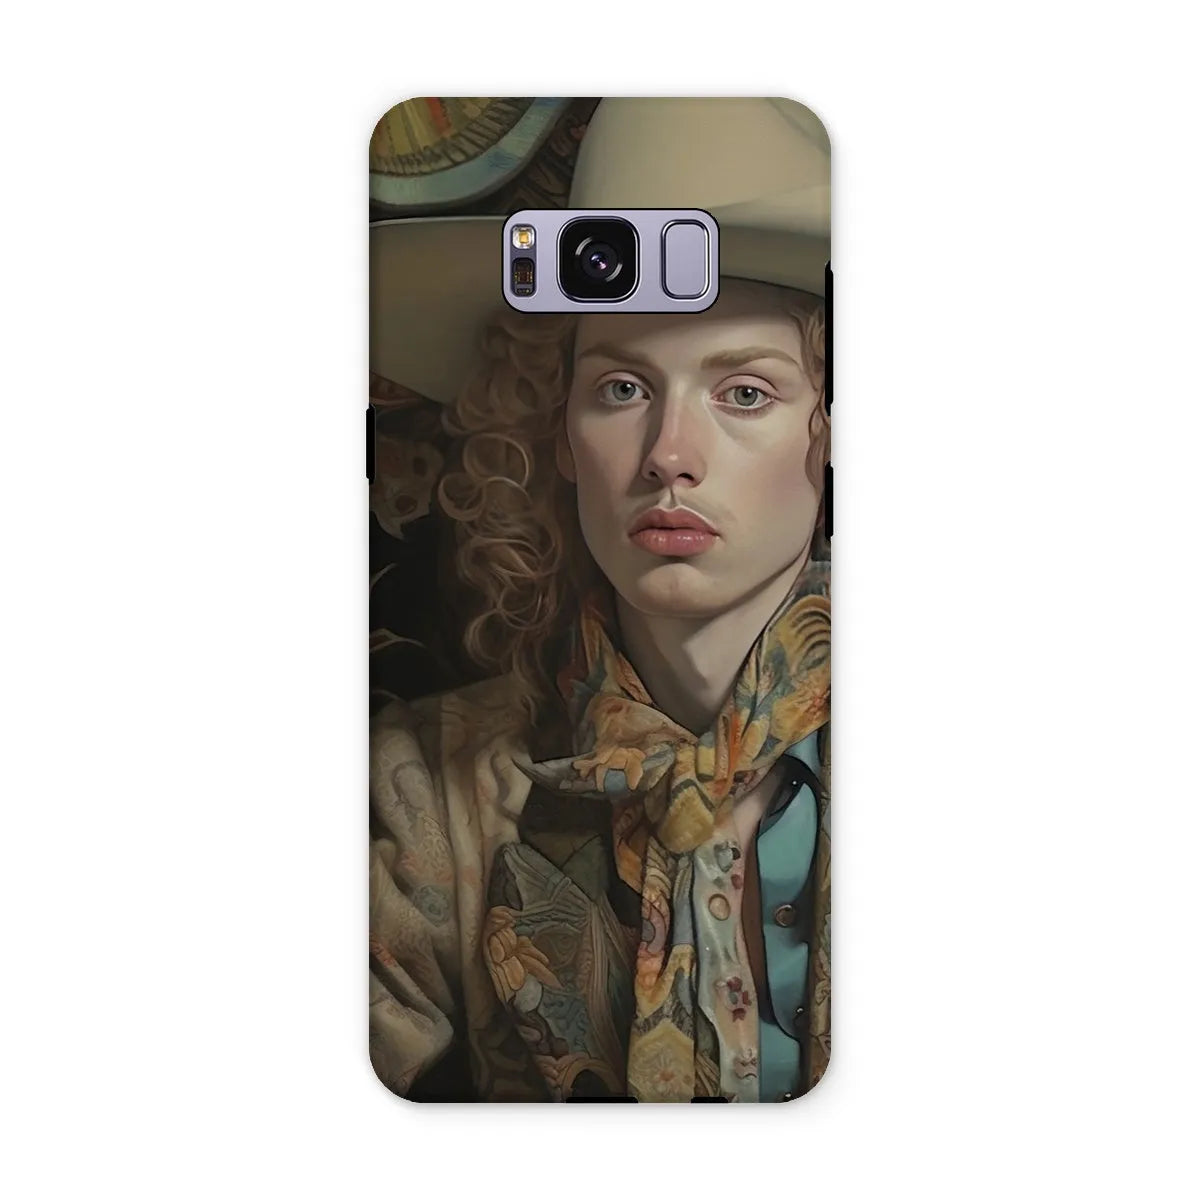 Ollie The Transgender Cowboy - F2m Dandy Outlaw Phone Case - Samsung Galaxy S8 Plus / Matte - Mobile Phone Cases